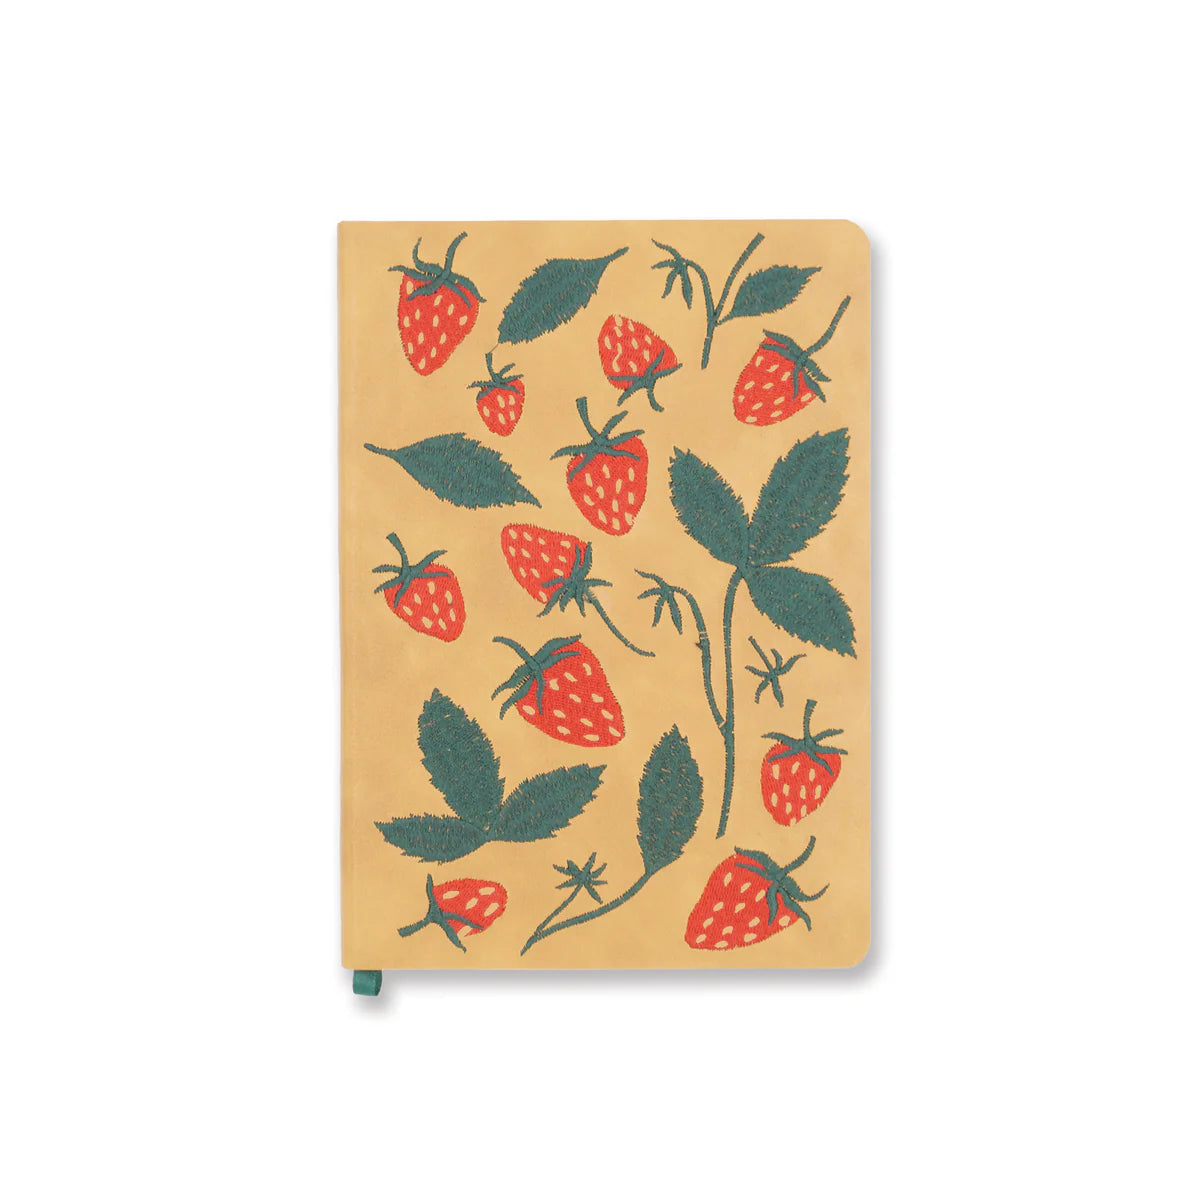 Elana's Berries Embroidered Hardcover Notebook